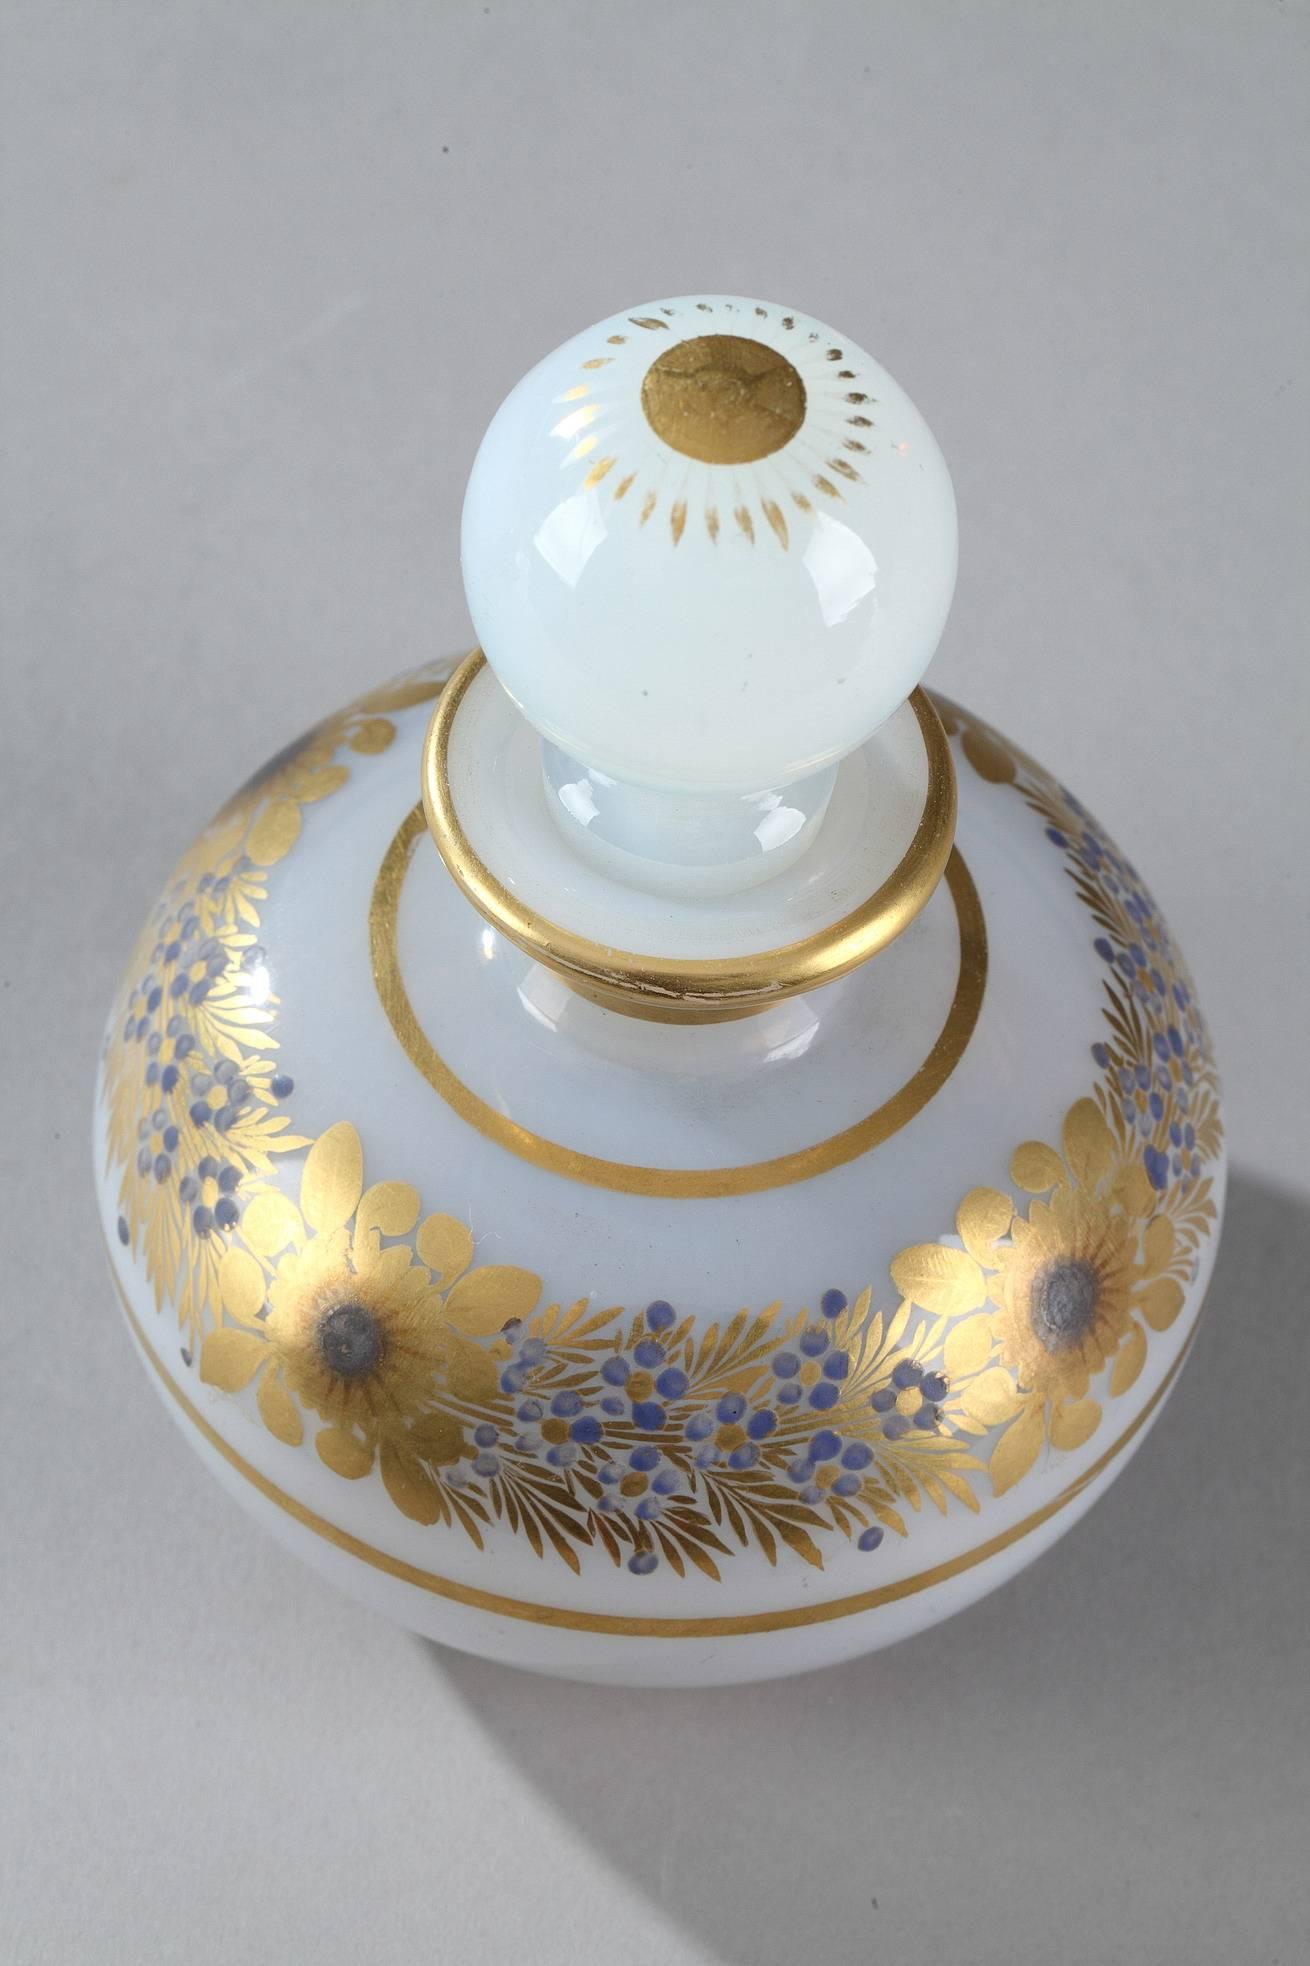 White bulle de savon (soap bubble) opaline perfume bottle with its ball-shaped stopper topped with petals. Gilded stripes decorate the neck and a blue wreath of anemones and forget-me-nots adorn the paunch. This exquisite decoration was produced by